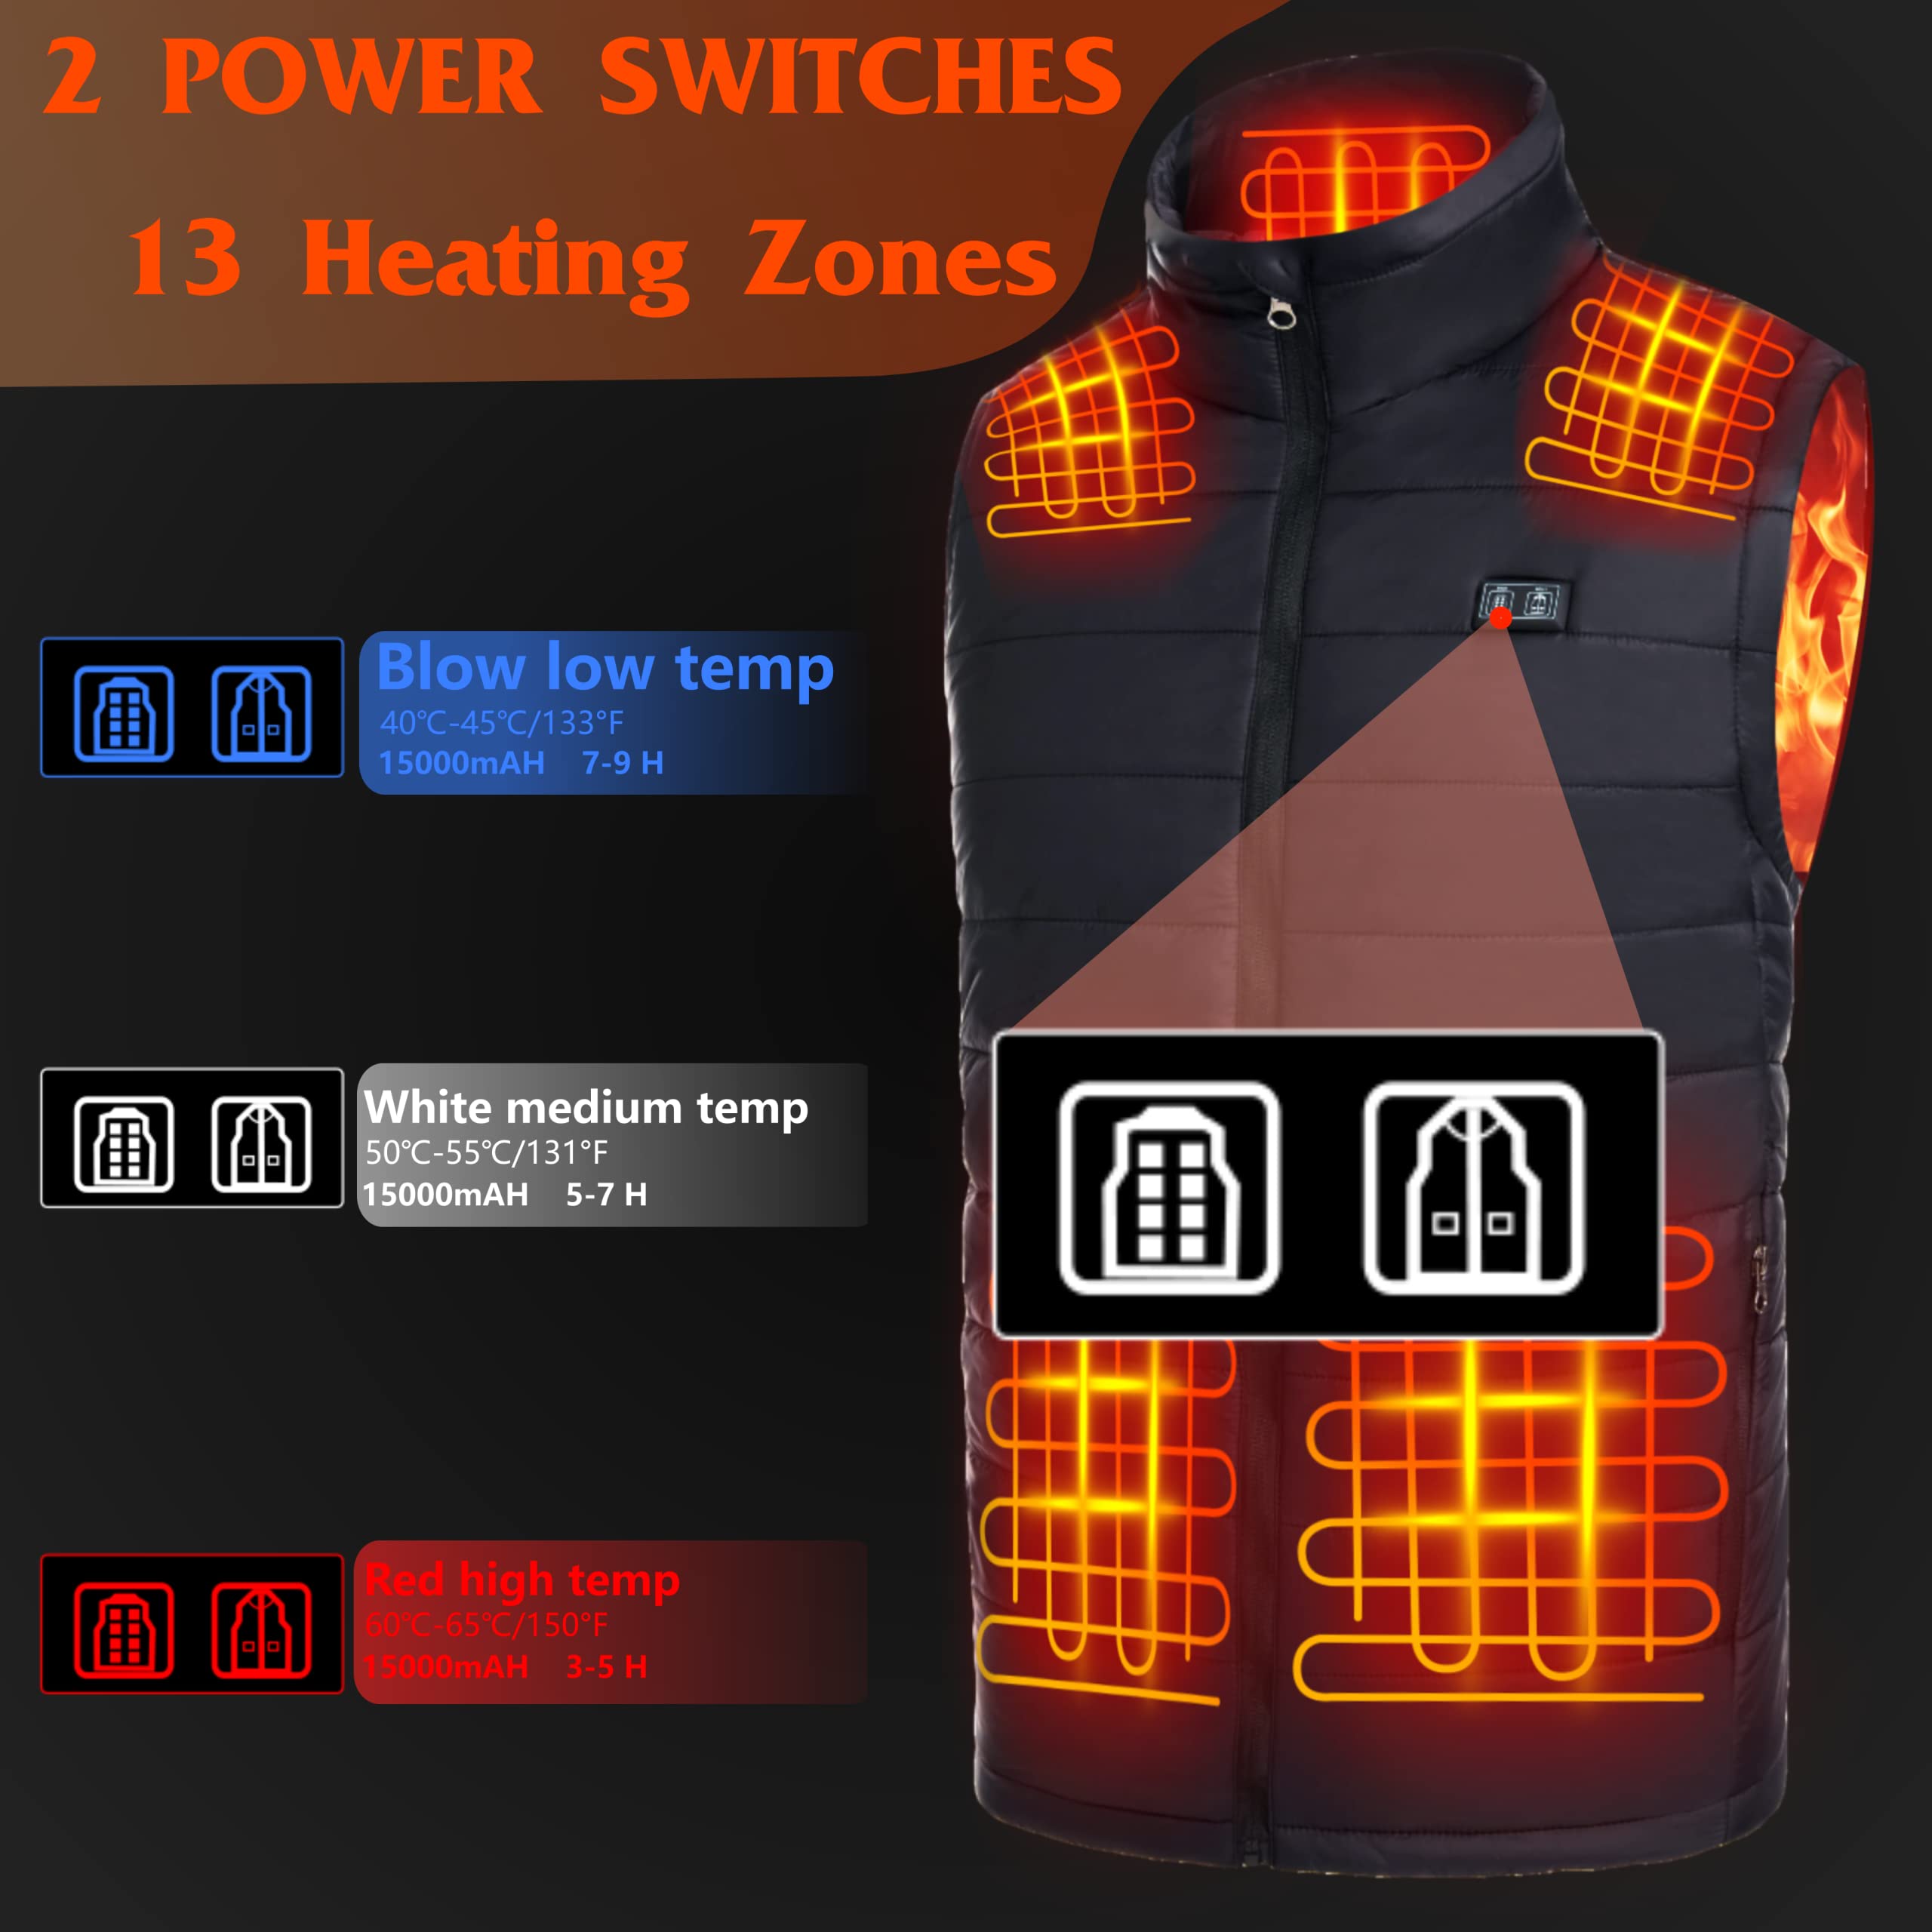 Unilove Heated Vest with Battery Pack Heated Hunting Vest, Smart Electric Heating Vest, Warming Heating Vest for Hiking